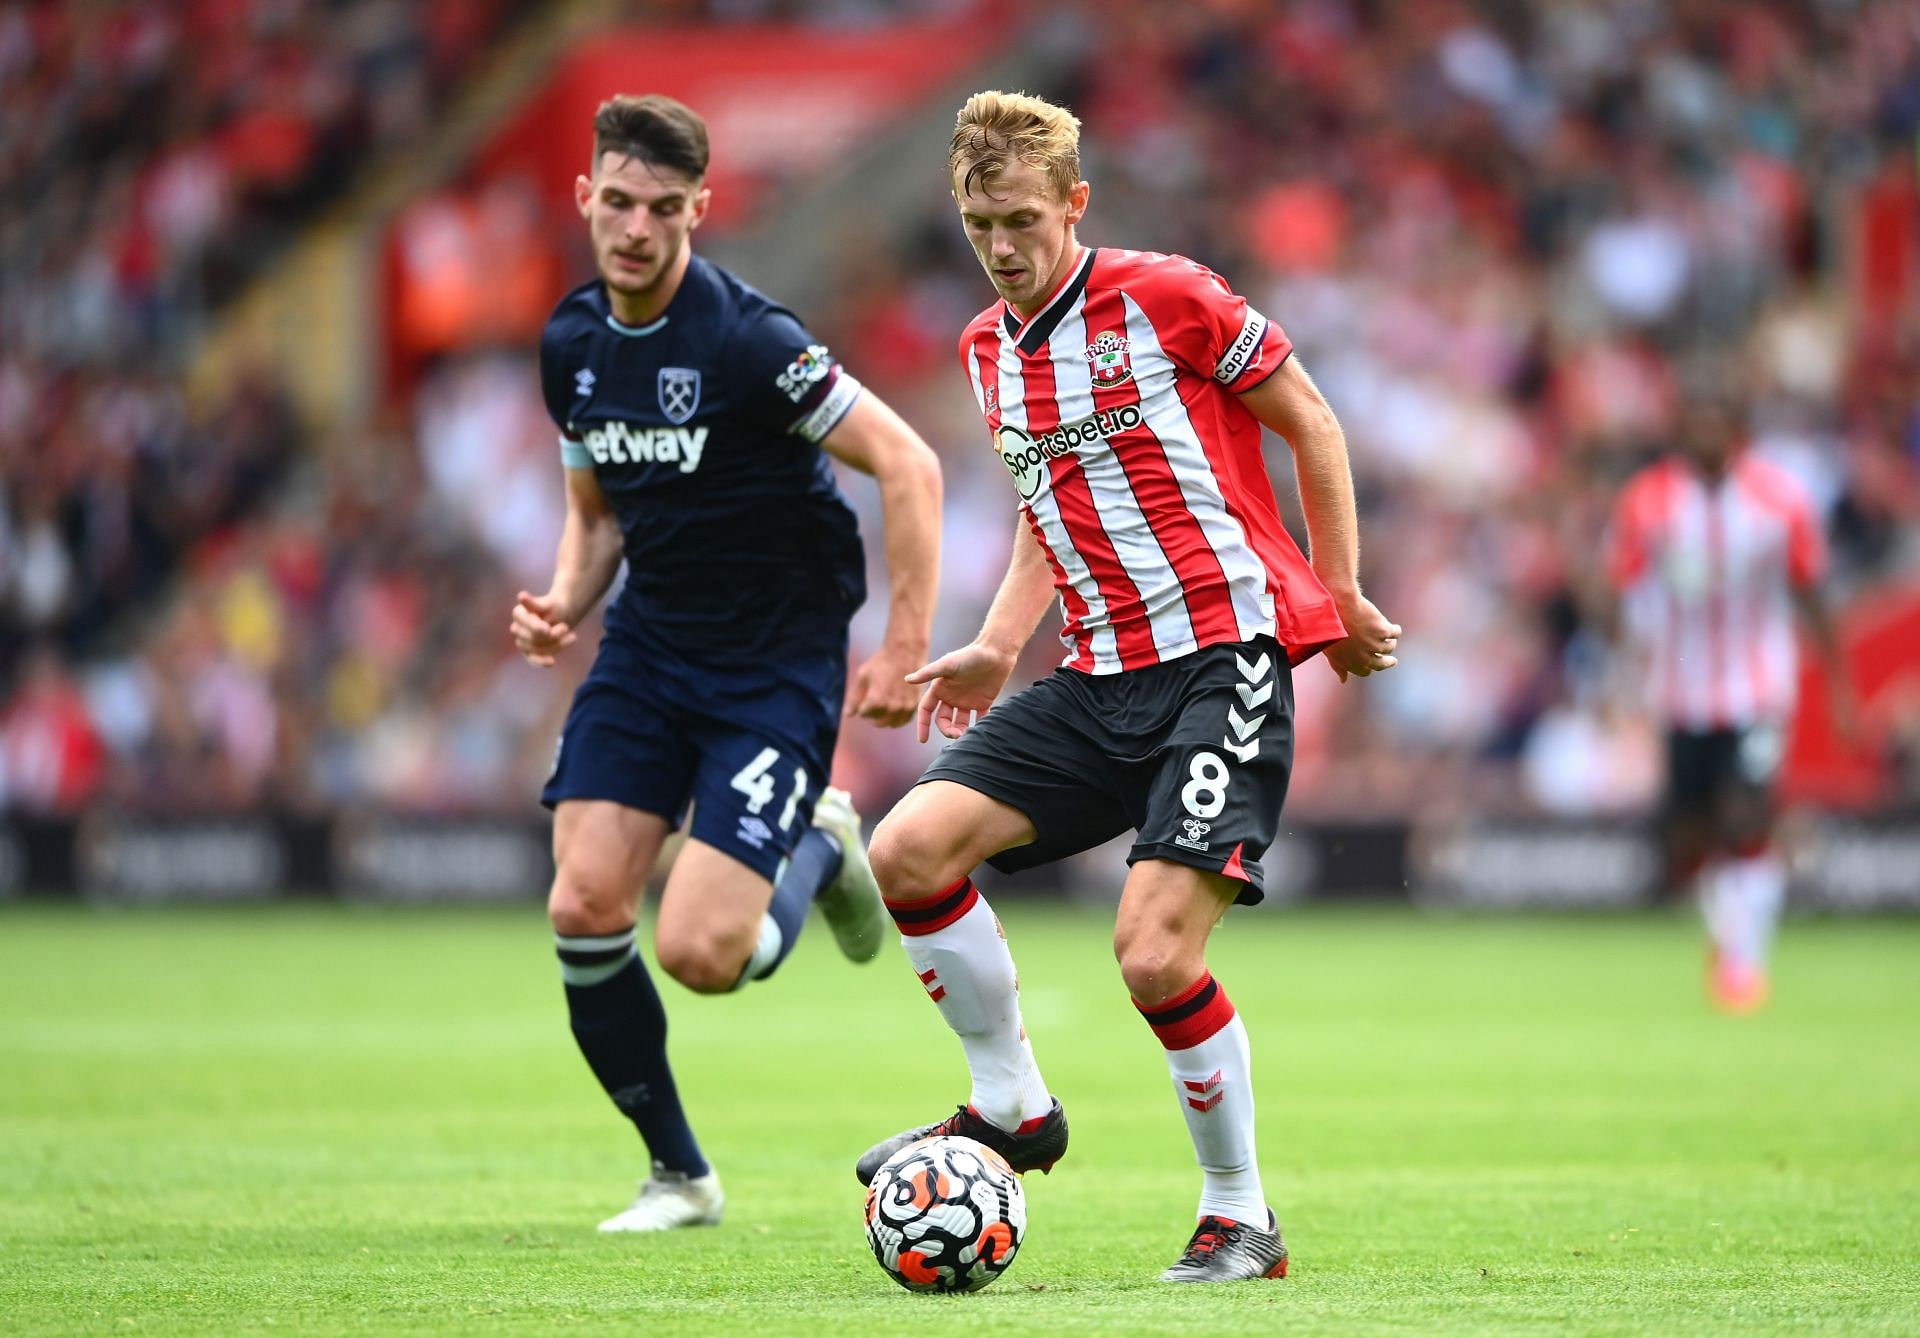 Southampton face West Ham United in their FA Cup fixture on Wednesday